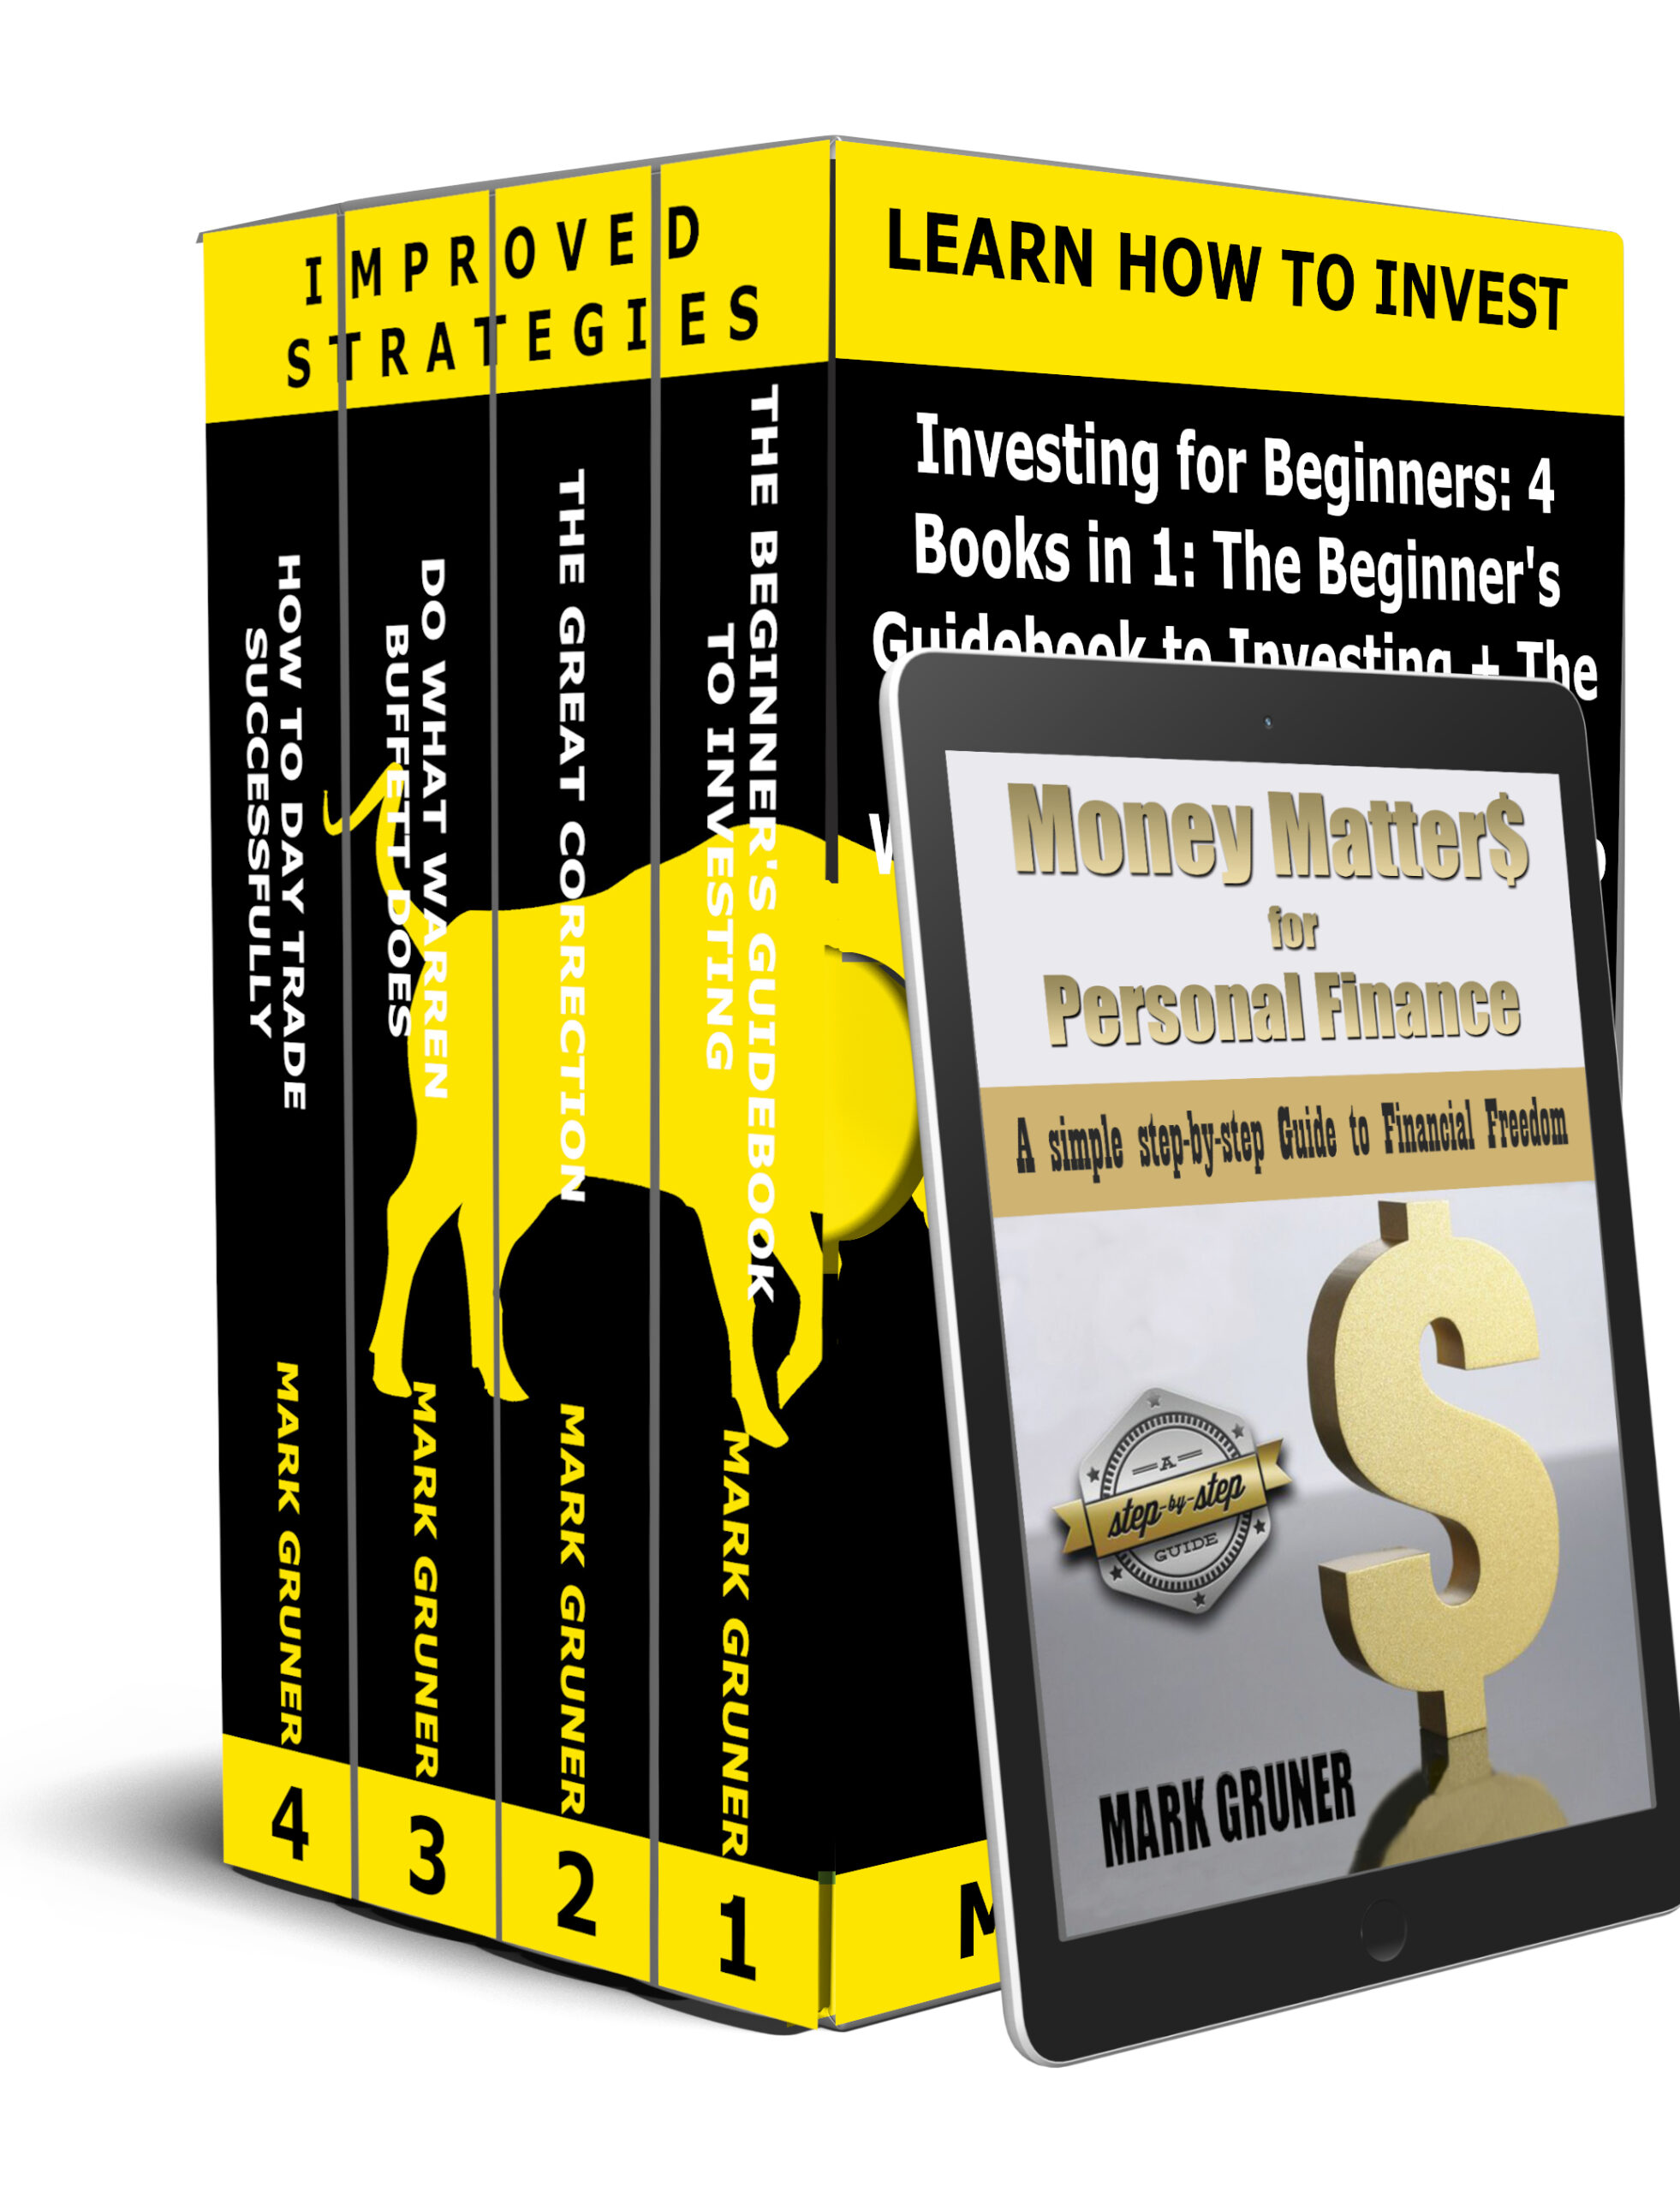 FREE: Investing for Beginners: 4 Books in 1: Plus Money Matters for Personal Finance by Mark Gruner